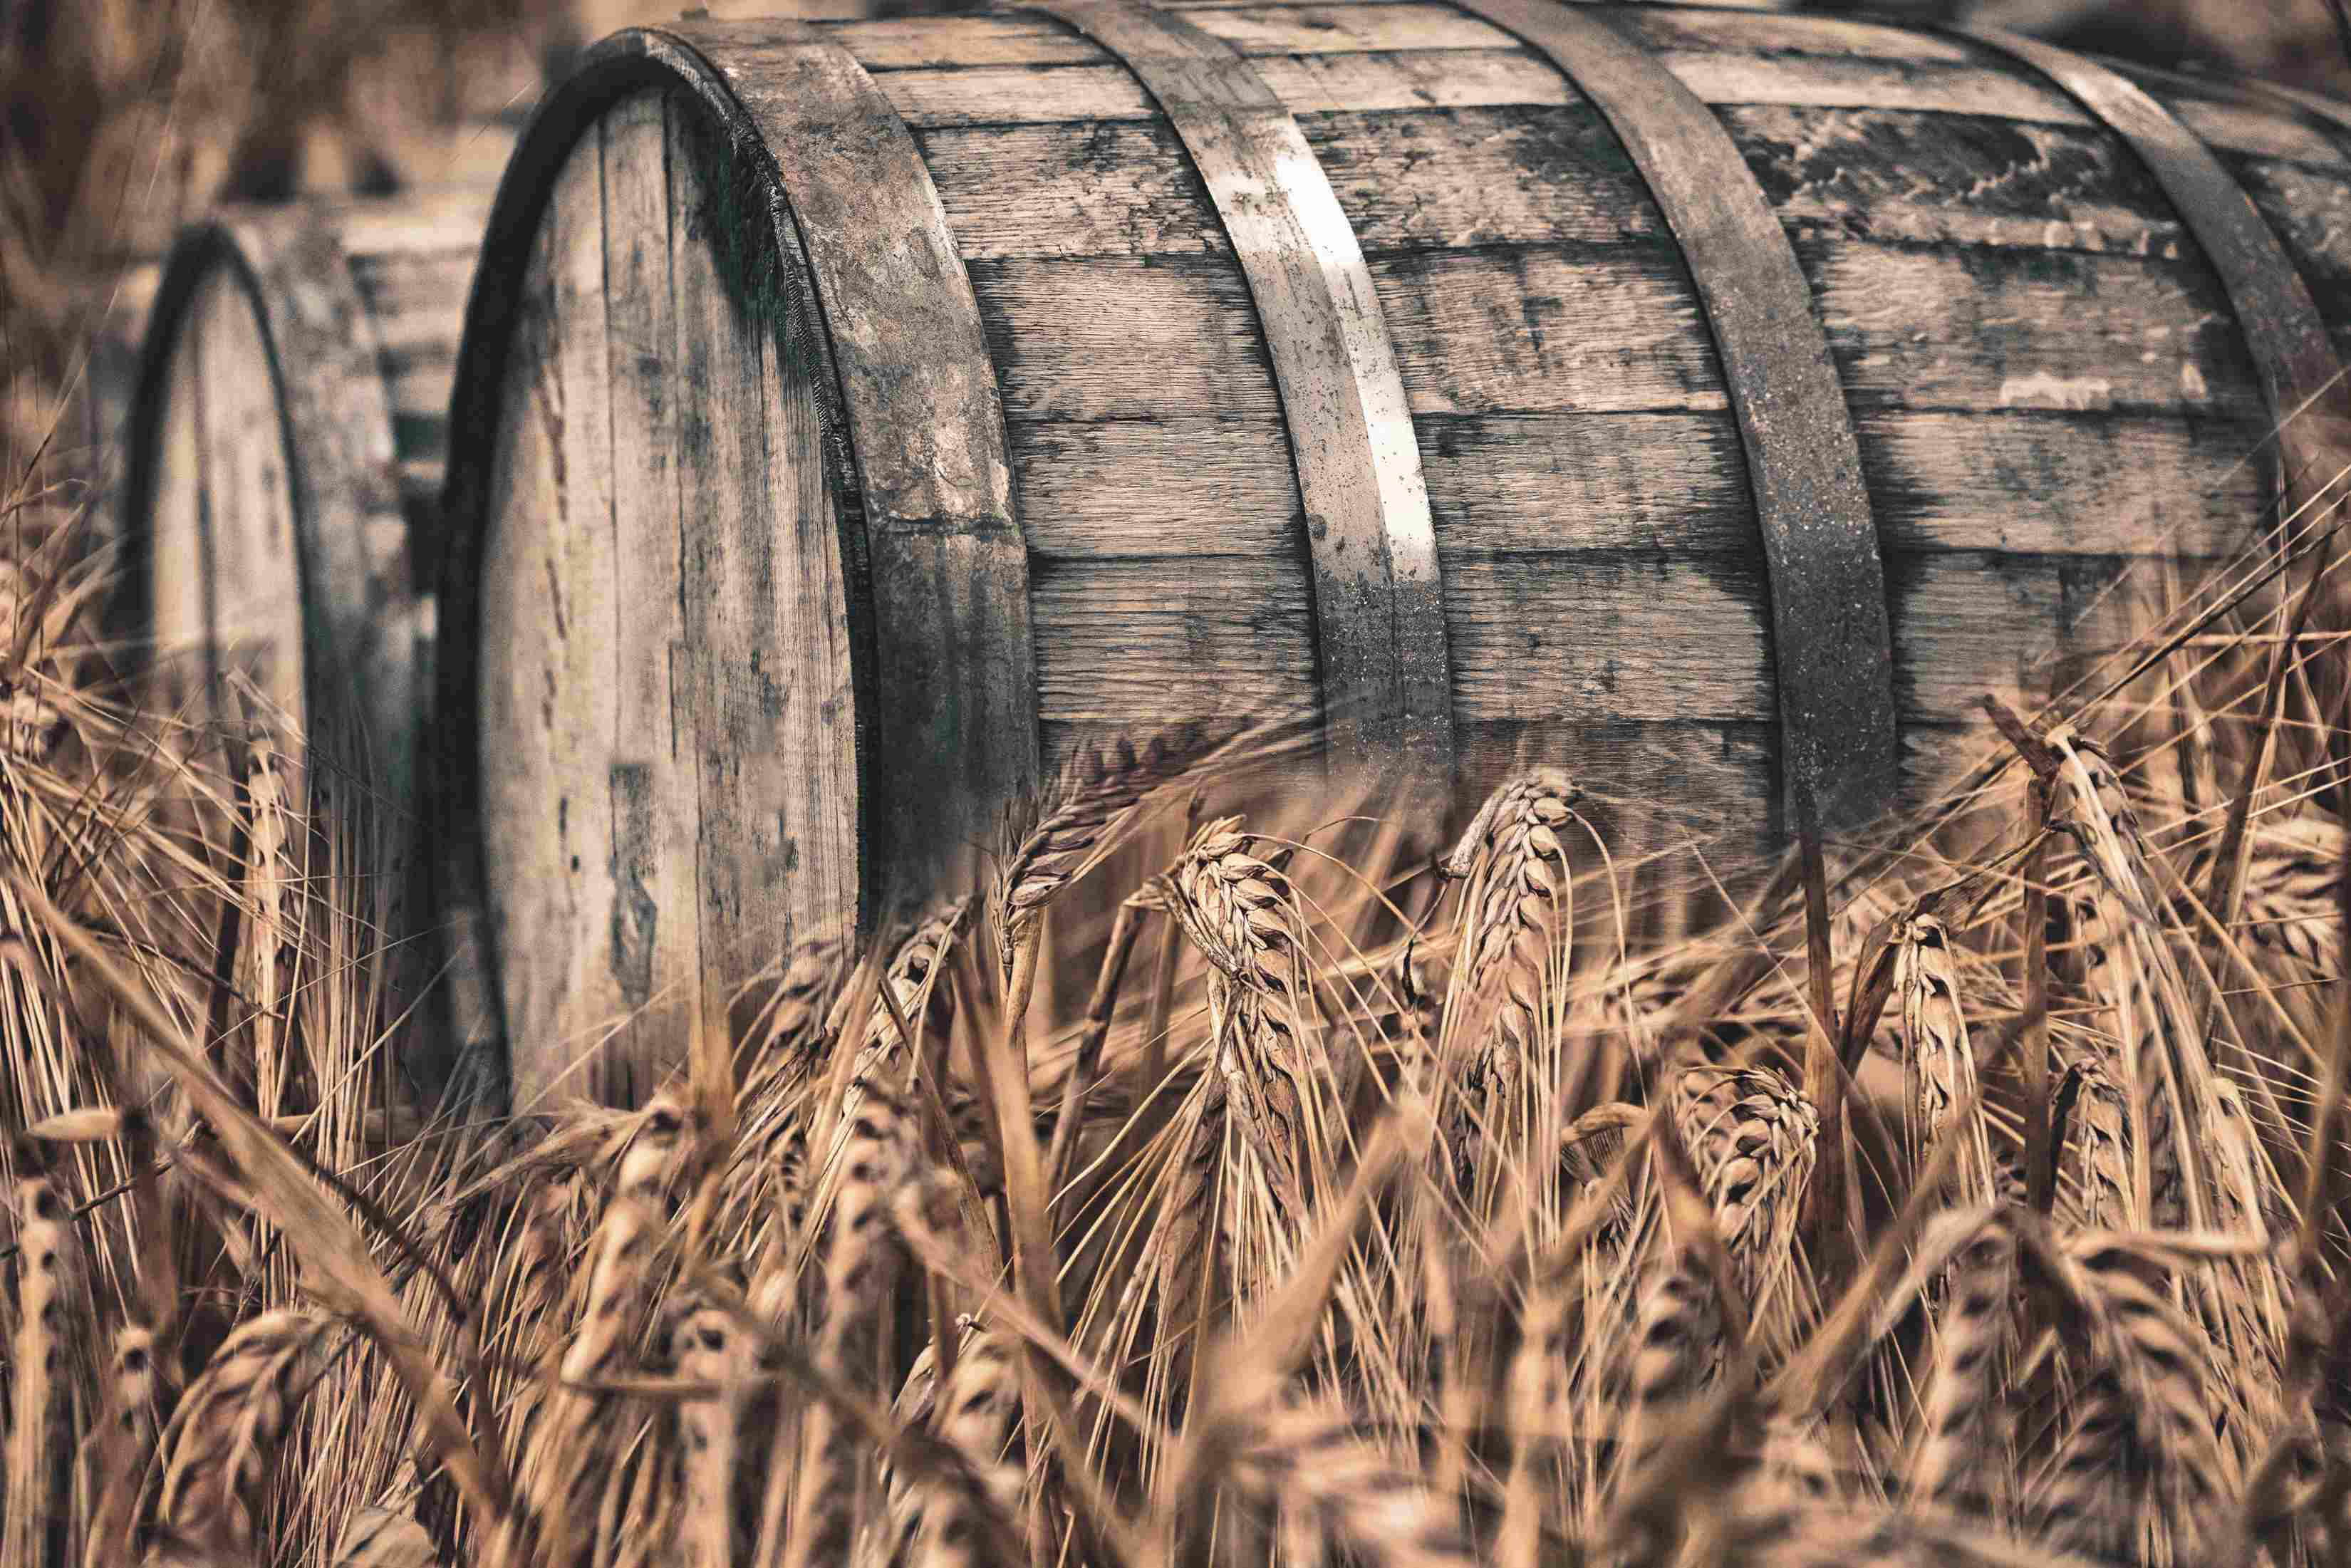 A Quick Look at the Origin of Whisky